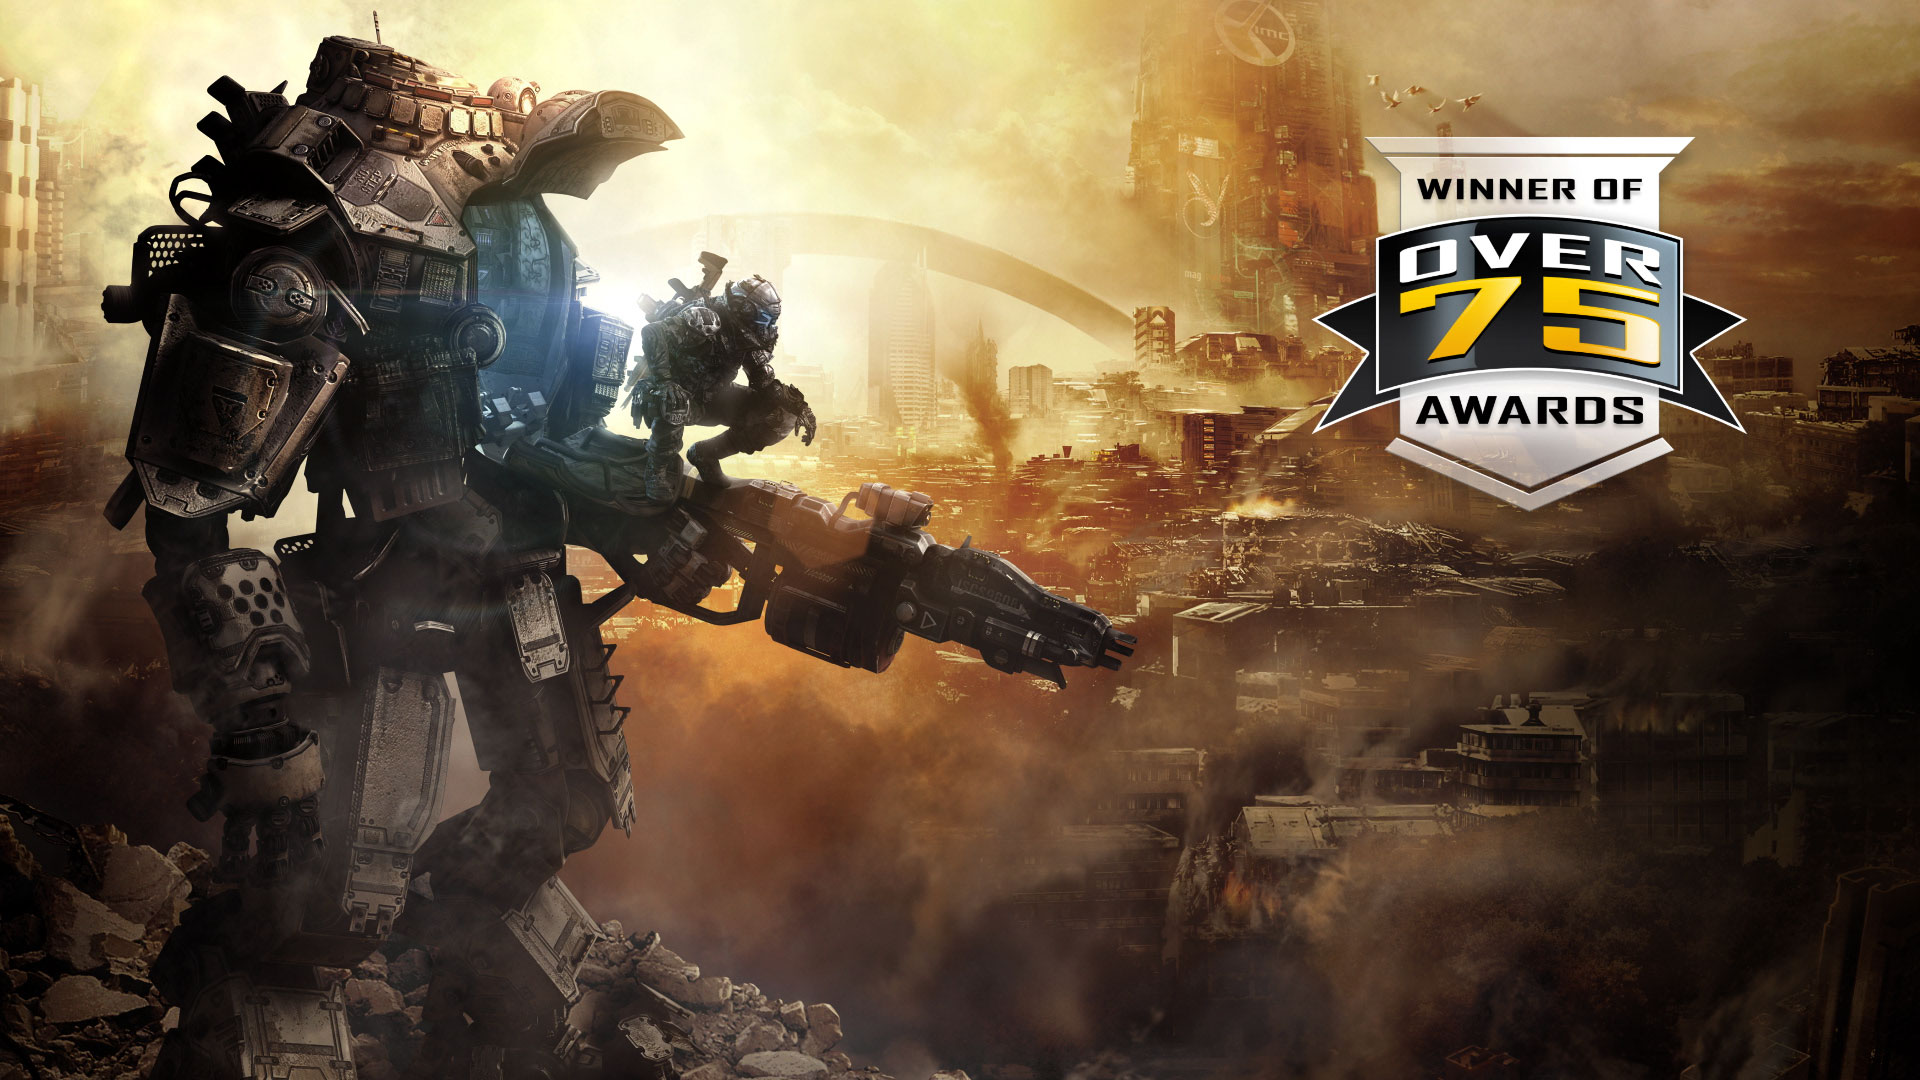 Titanfall update out later today – adds private matches and changes Gooser challenge